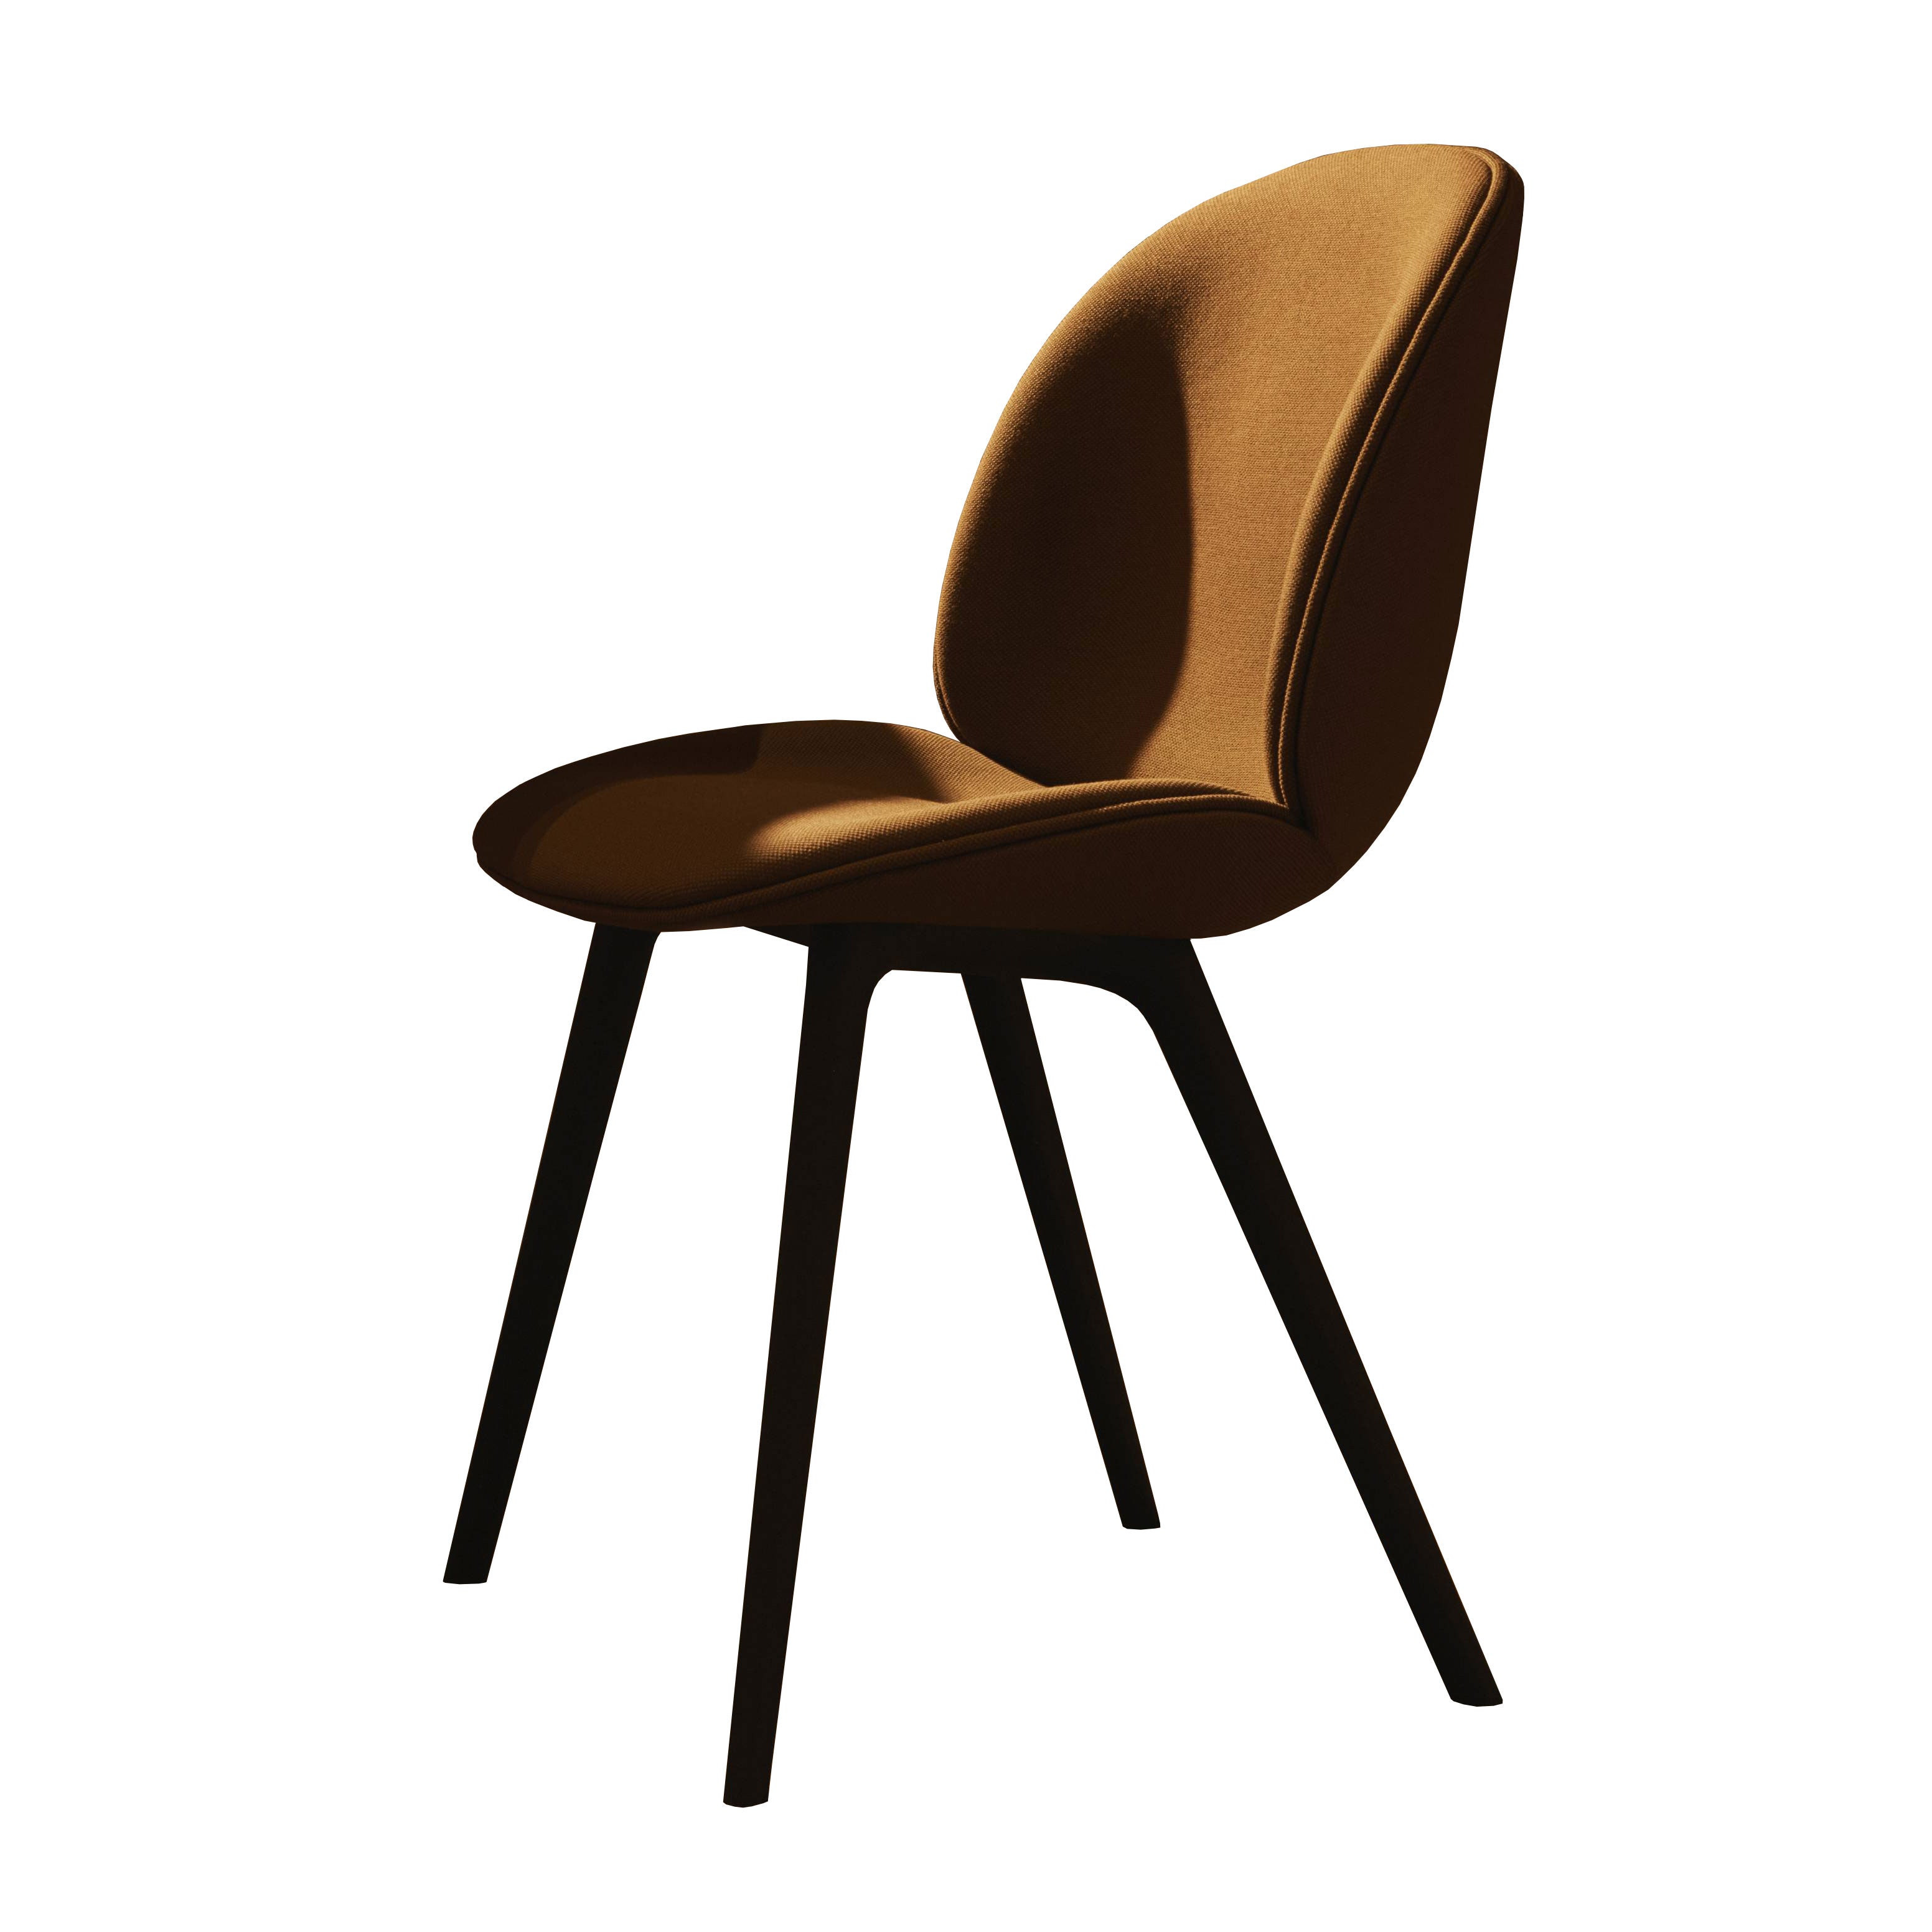 Beetle Dining Chair: Black Plastic Base + Fully Upholstered